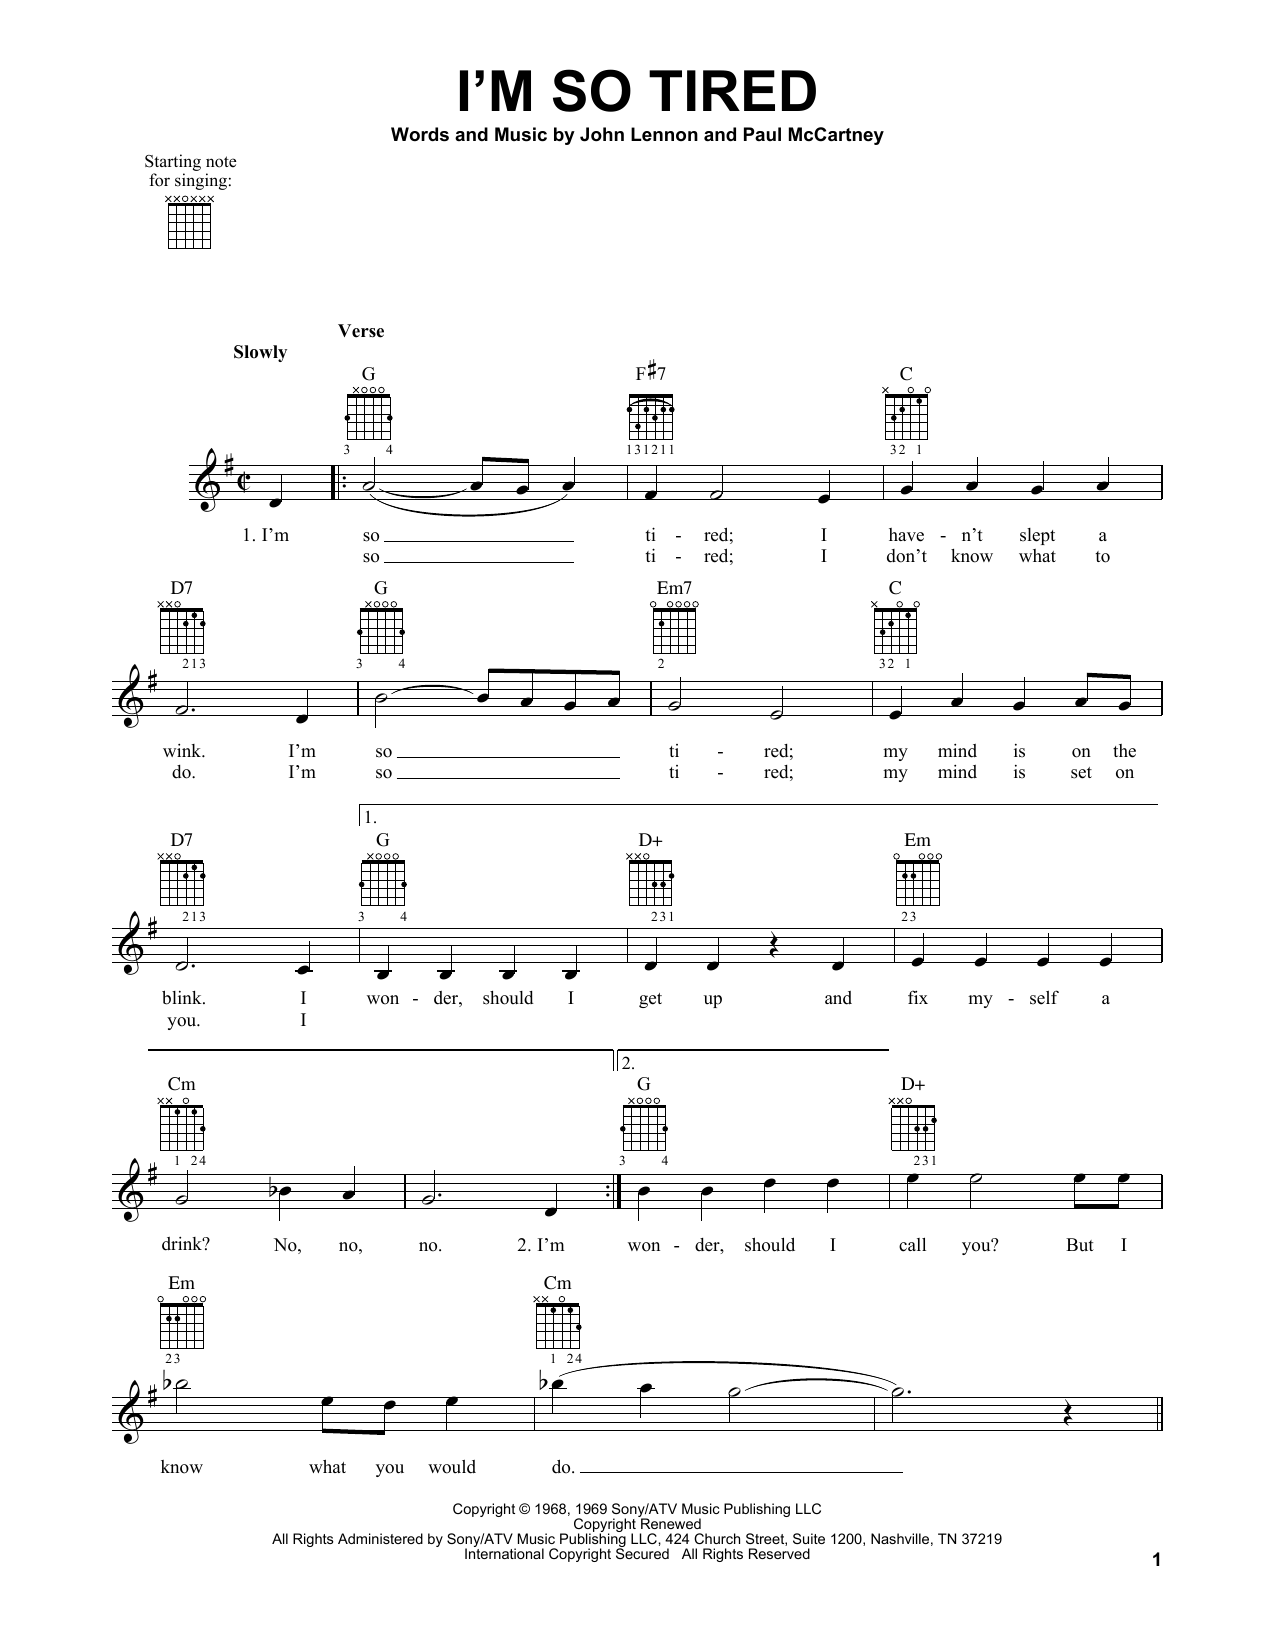 Download The Beatles I'm So Tired Sheet Music